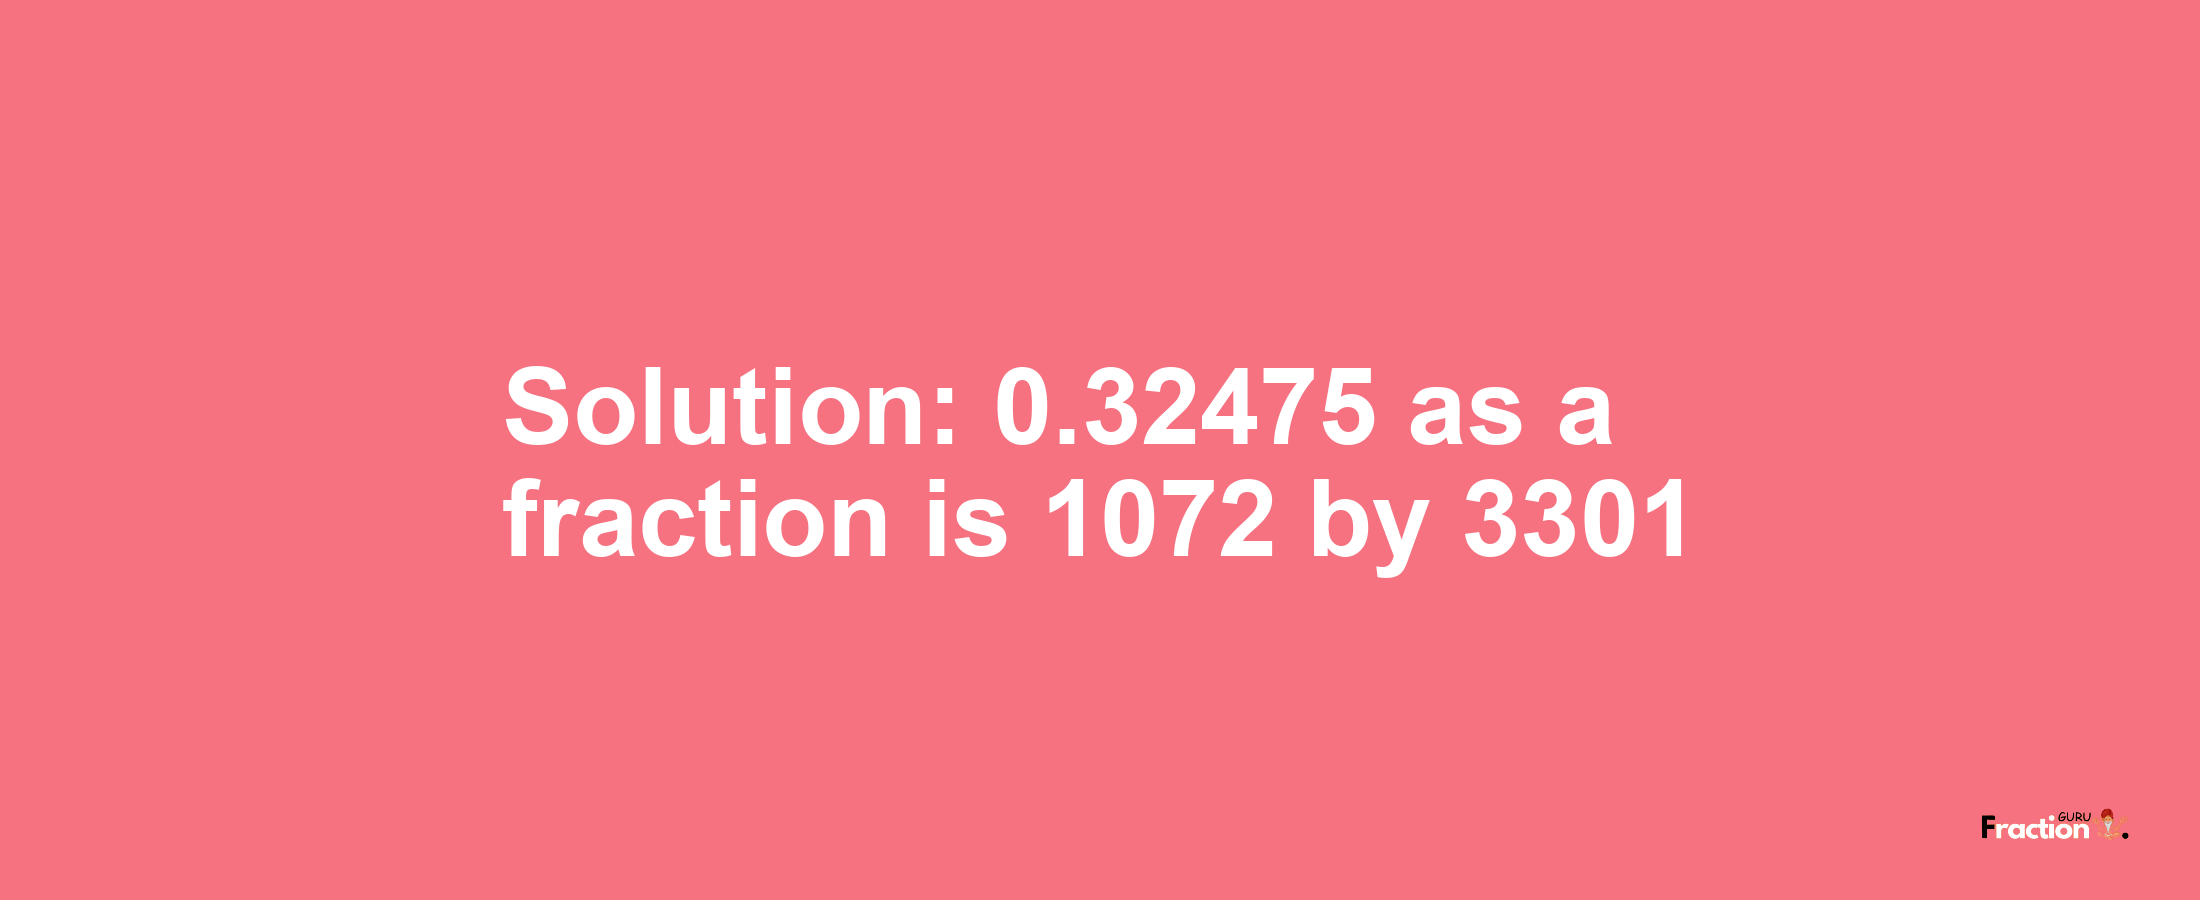 Solution:0.32475 as a fraction is 1072/3301